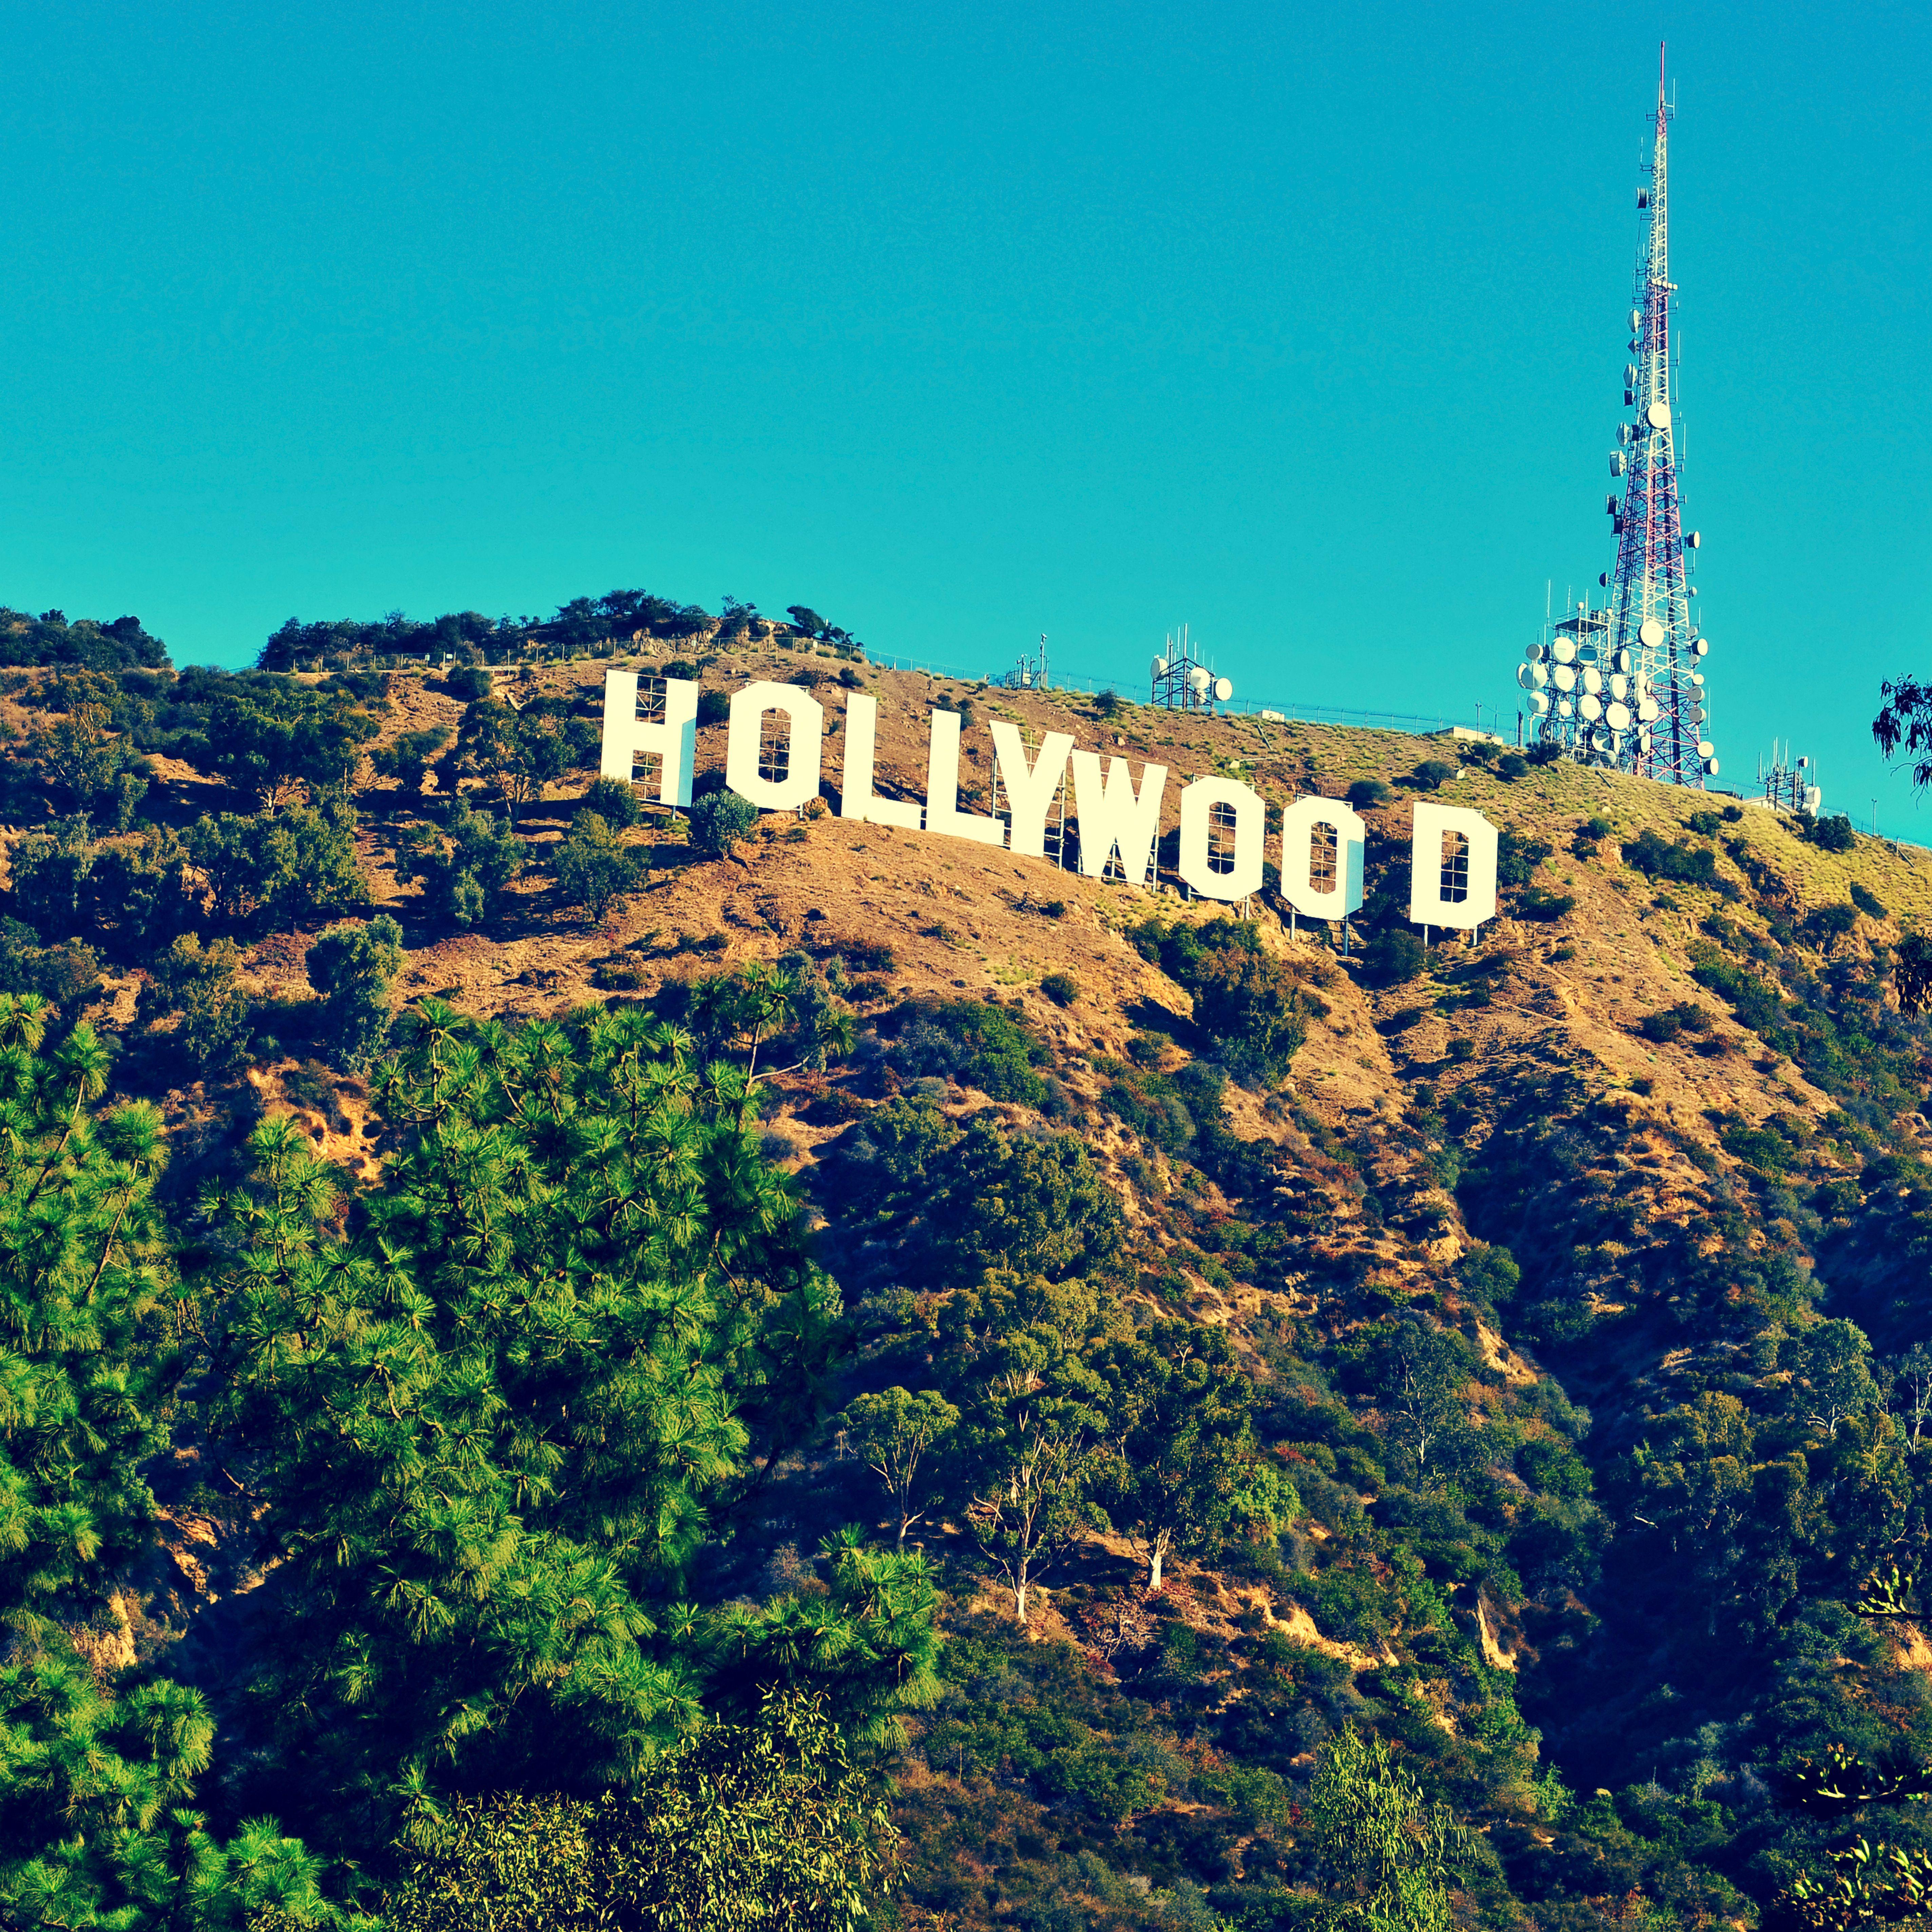 Stand Under the Hollywood Sign. Hollywood sign, Buckets and Hiking